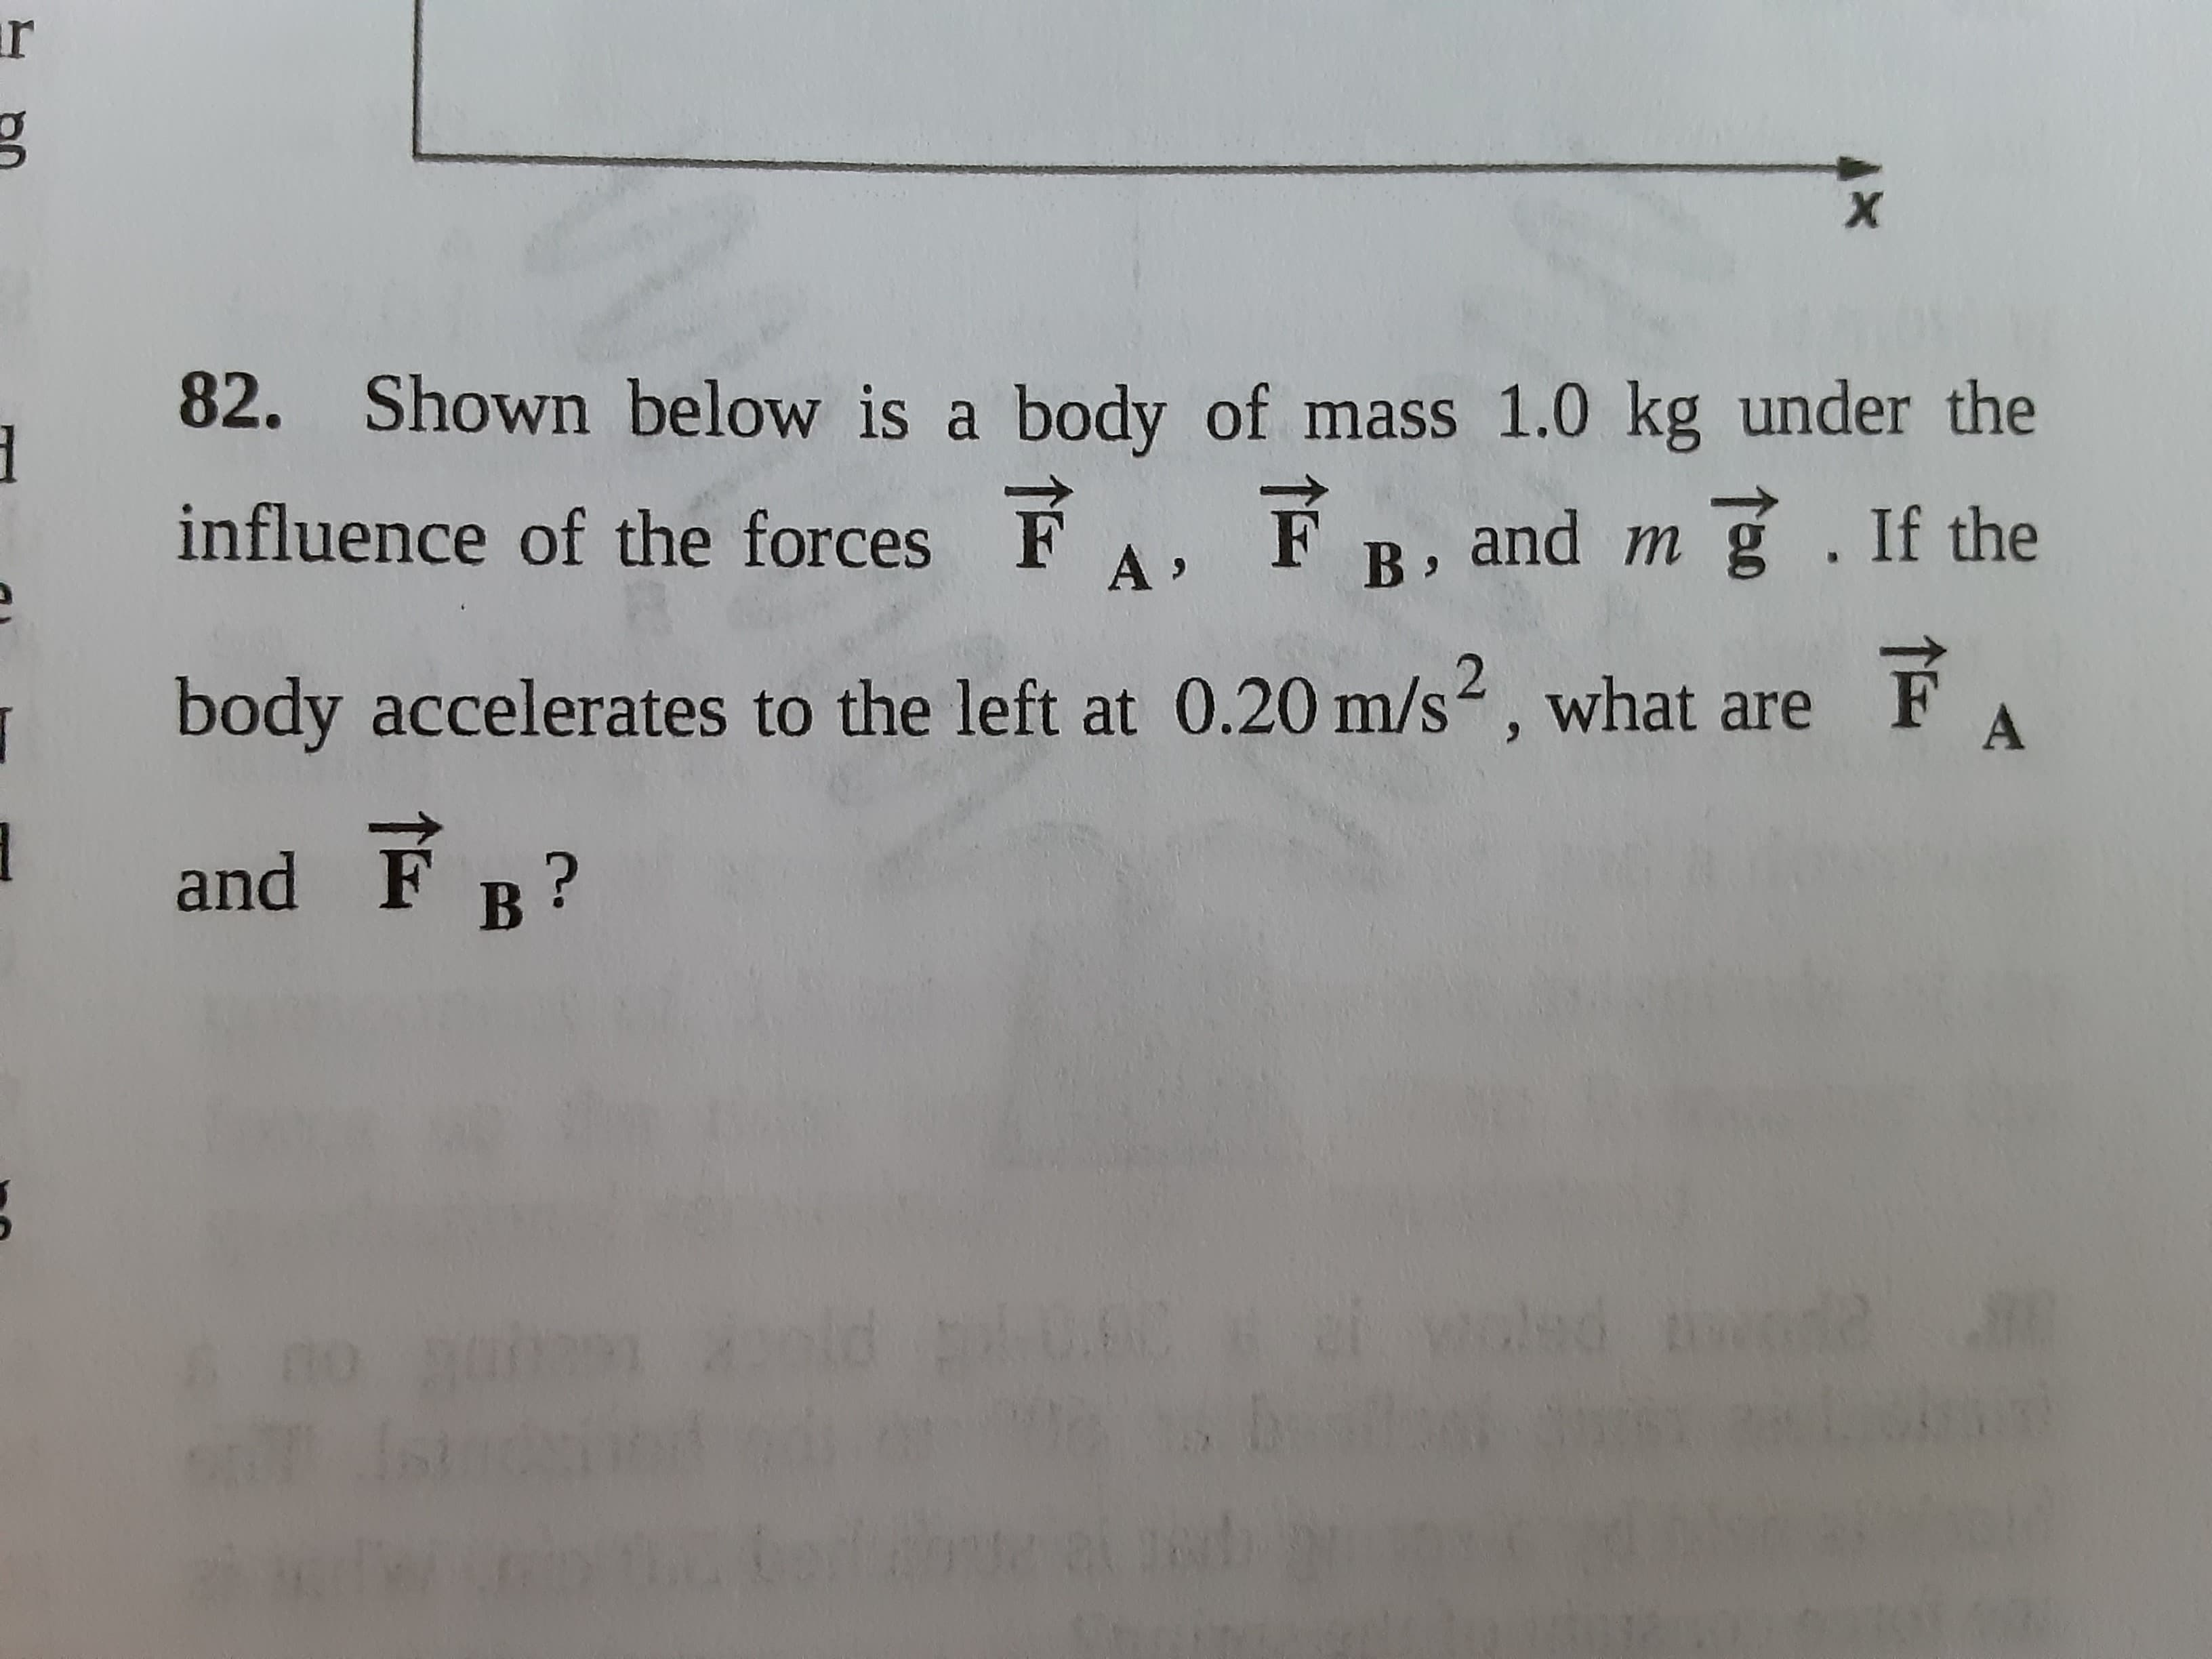 82. Shown below is a body of mass 1.0 kg under the
influence of the forces FA, F
B,
and m g. If the
body accelerates to the left at 0.20 m/s2, what are F
6.
and F B?
